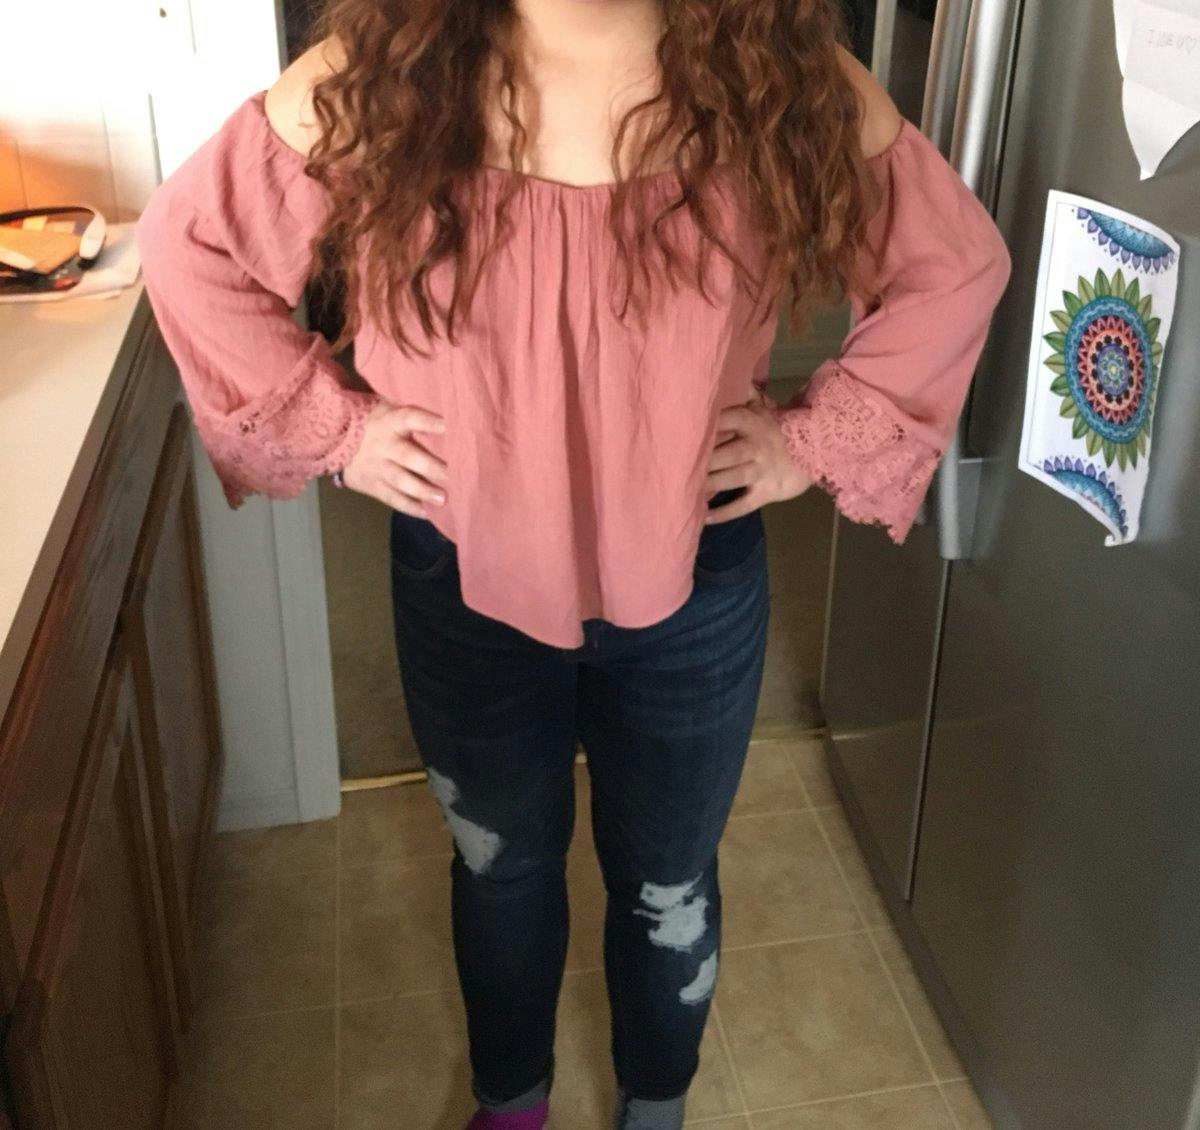 13-year-old Grace Villegas wears a Charlotte Russe top that she received criticism for wearing to school.